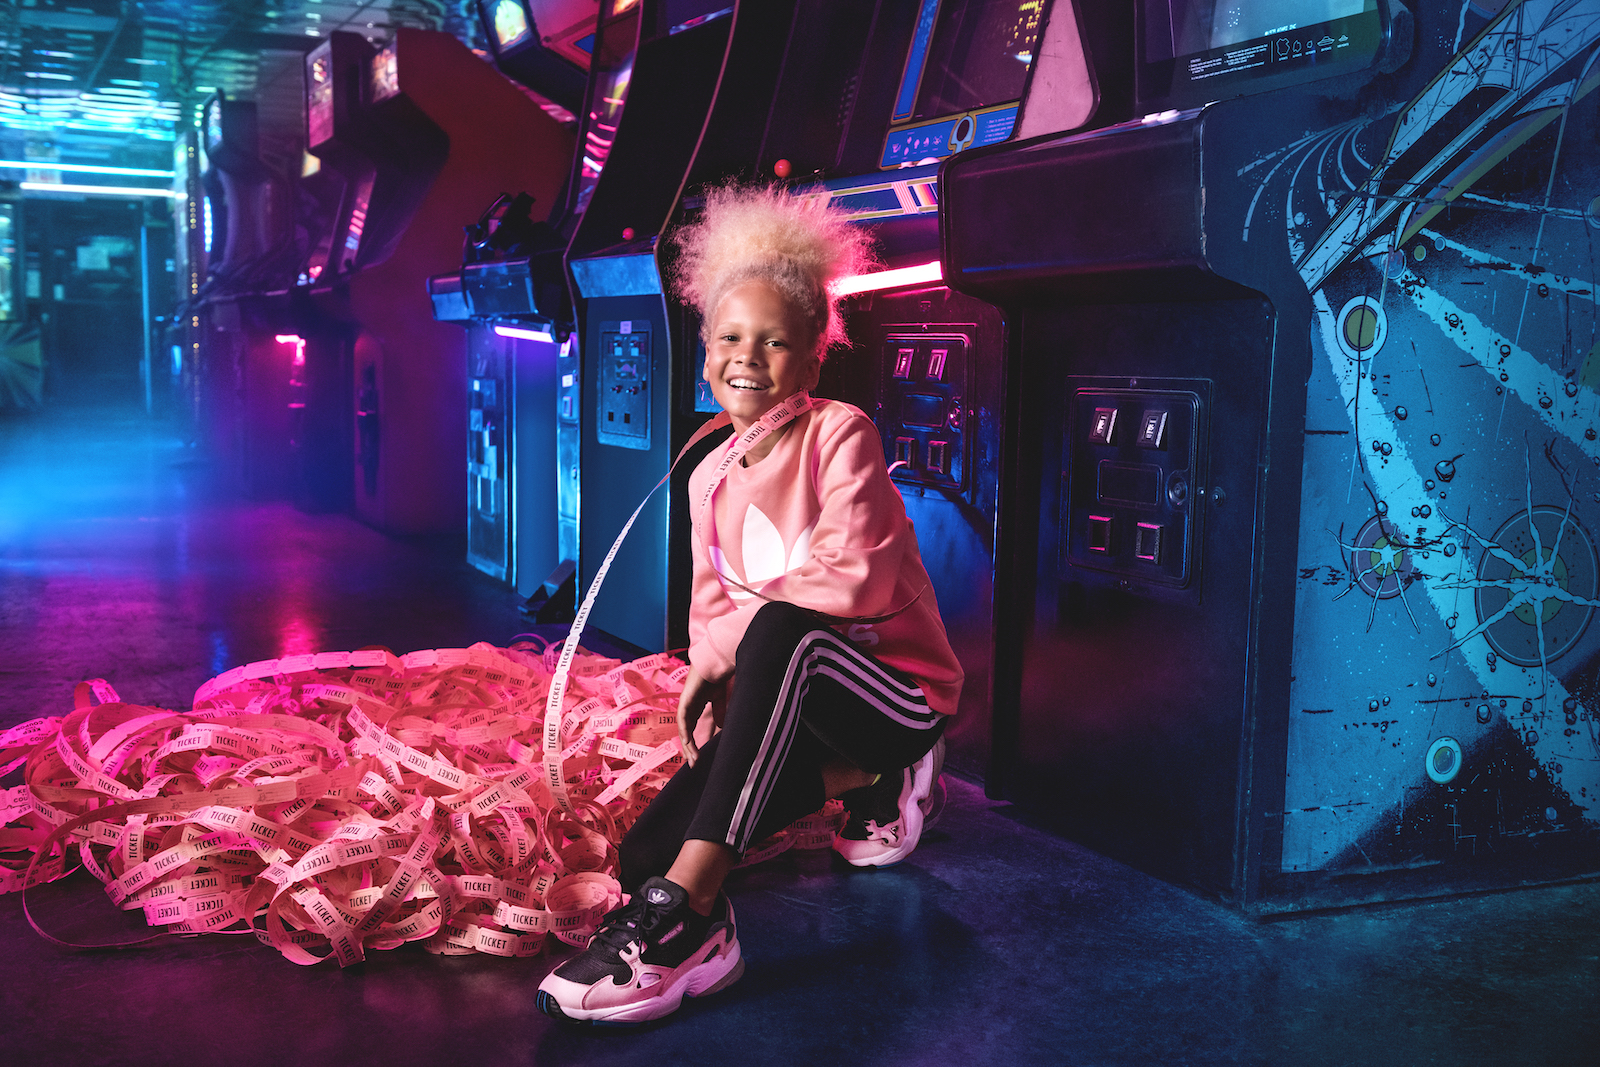 A smiling girl kneels in front of a row of arcade games with a huge pile of pink tickets.